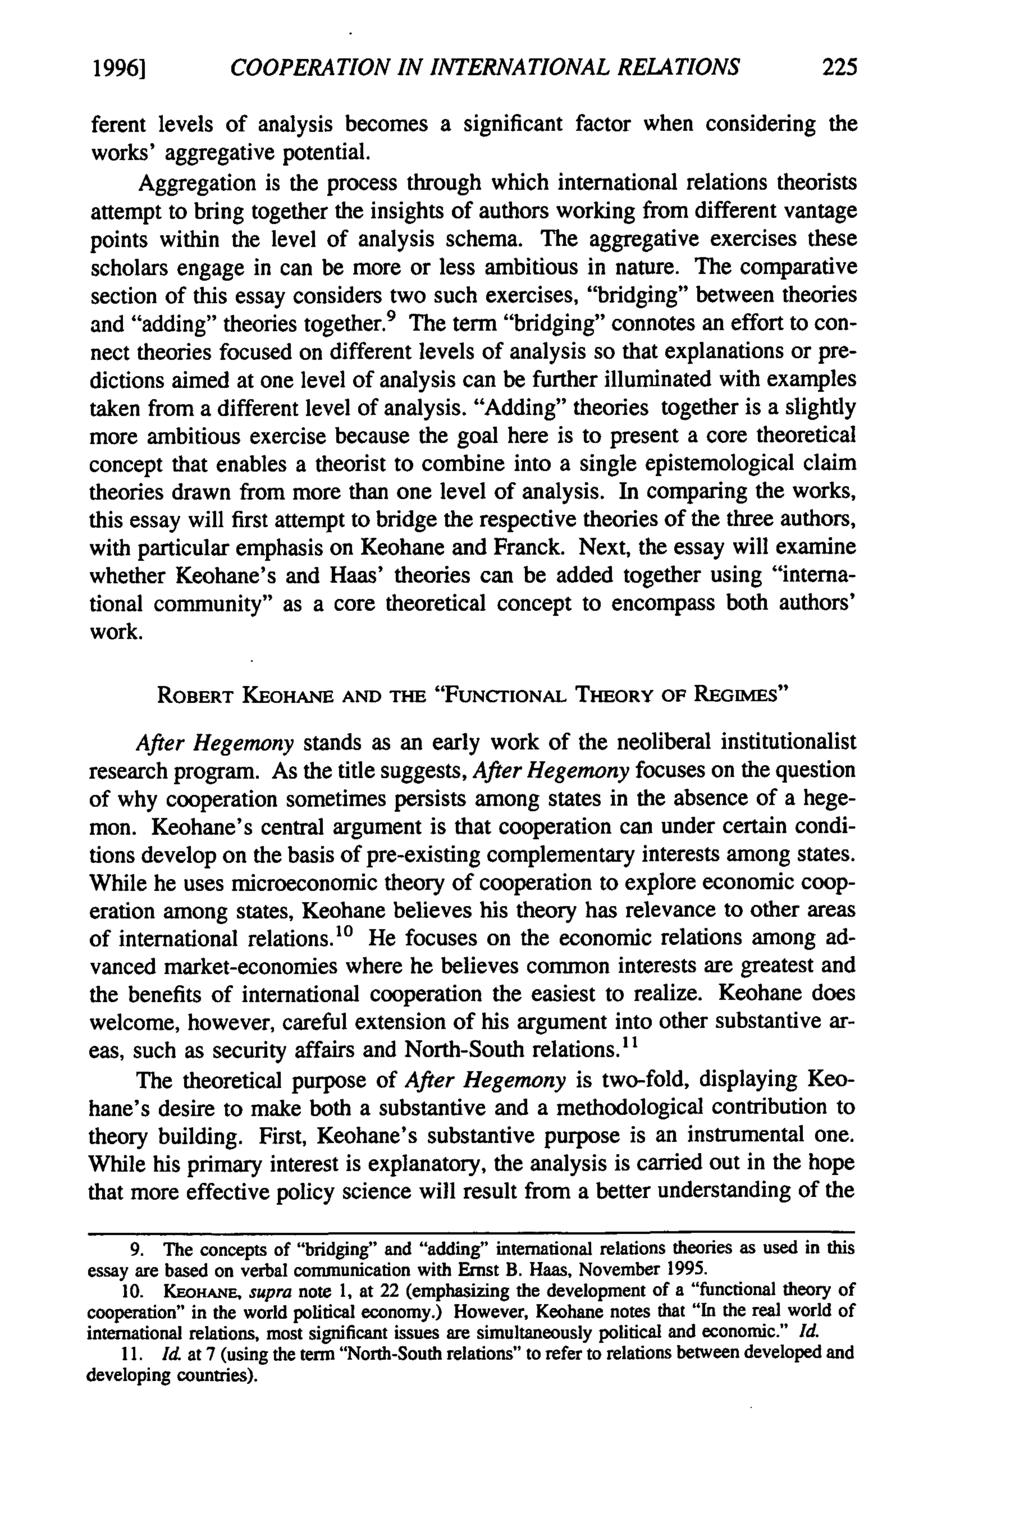 19961 COOPERATION IN INTERNATIONAL RELATIONS ferent levels of analysis becomes a significant factor when considering the works' aggregative potential.